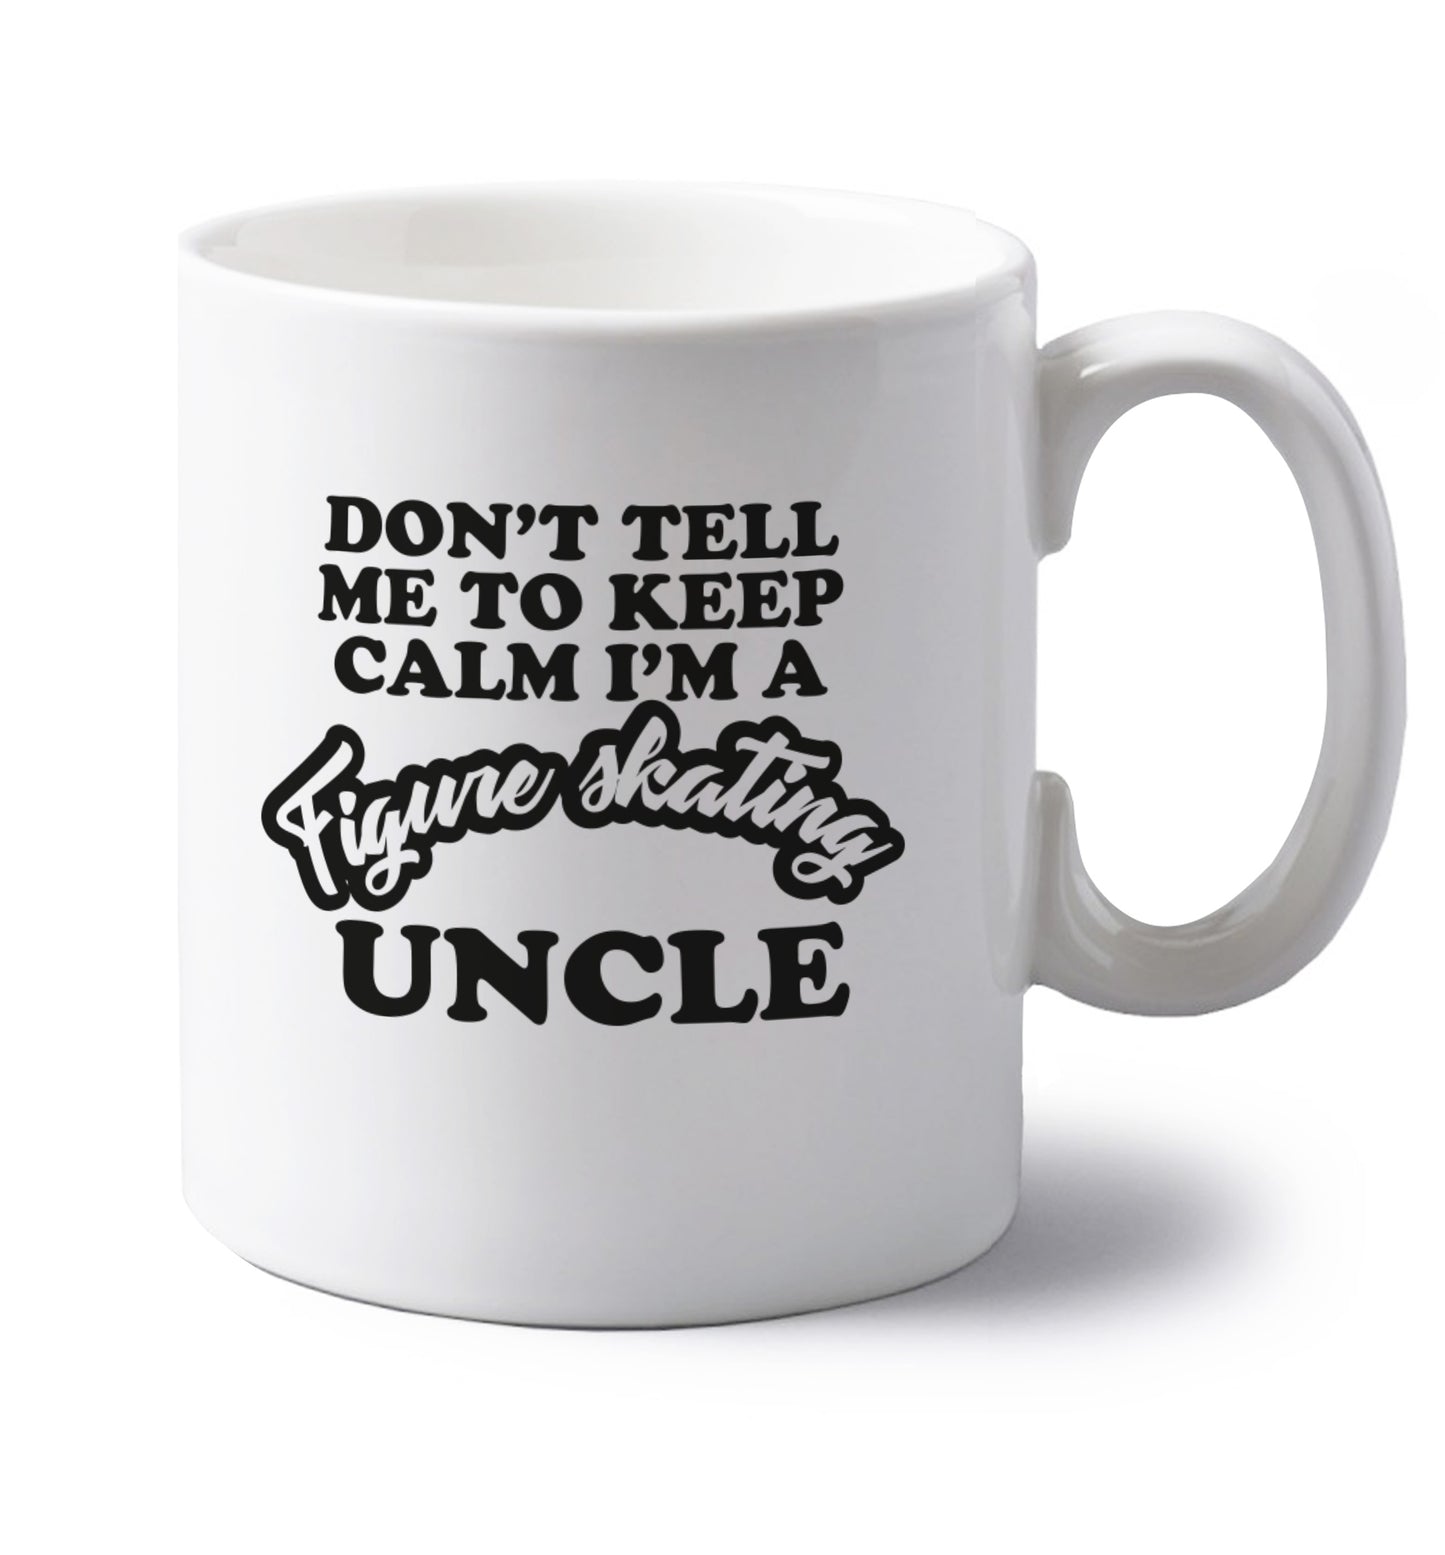 Don't tell me to keep calm I'm a figure skating uncle left handed white ceramic mug 